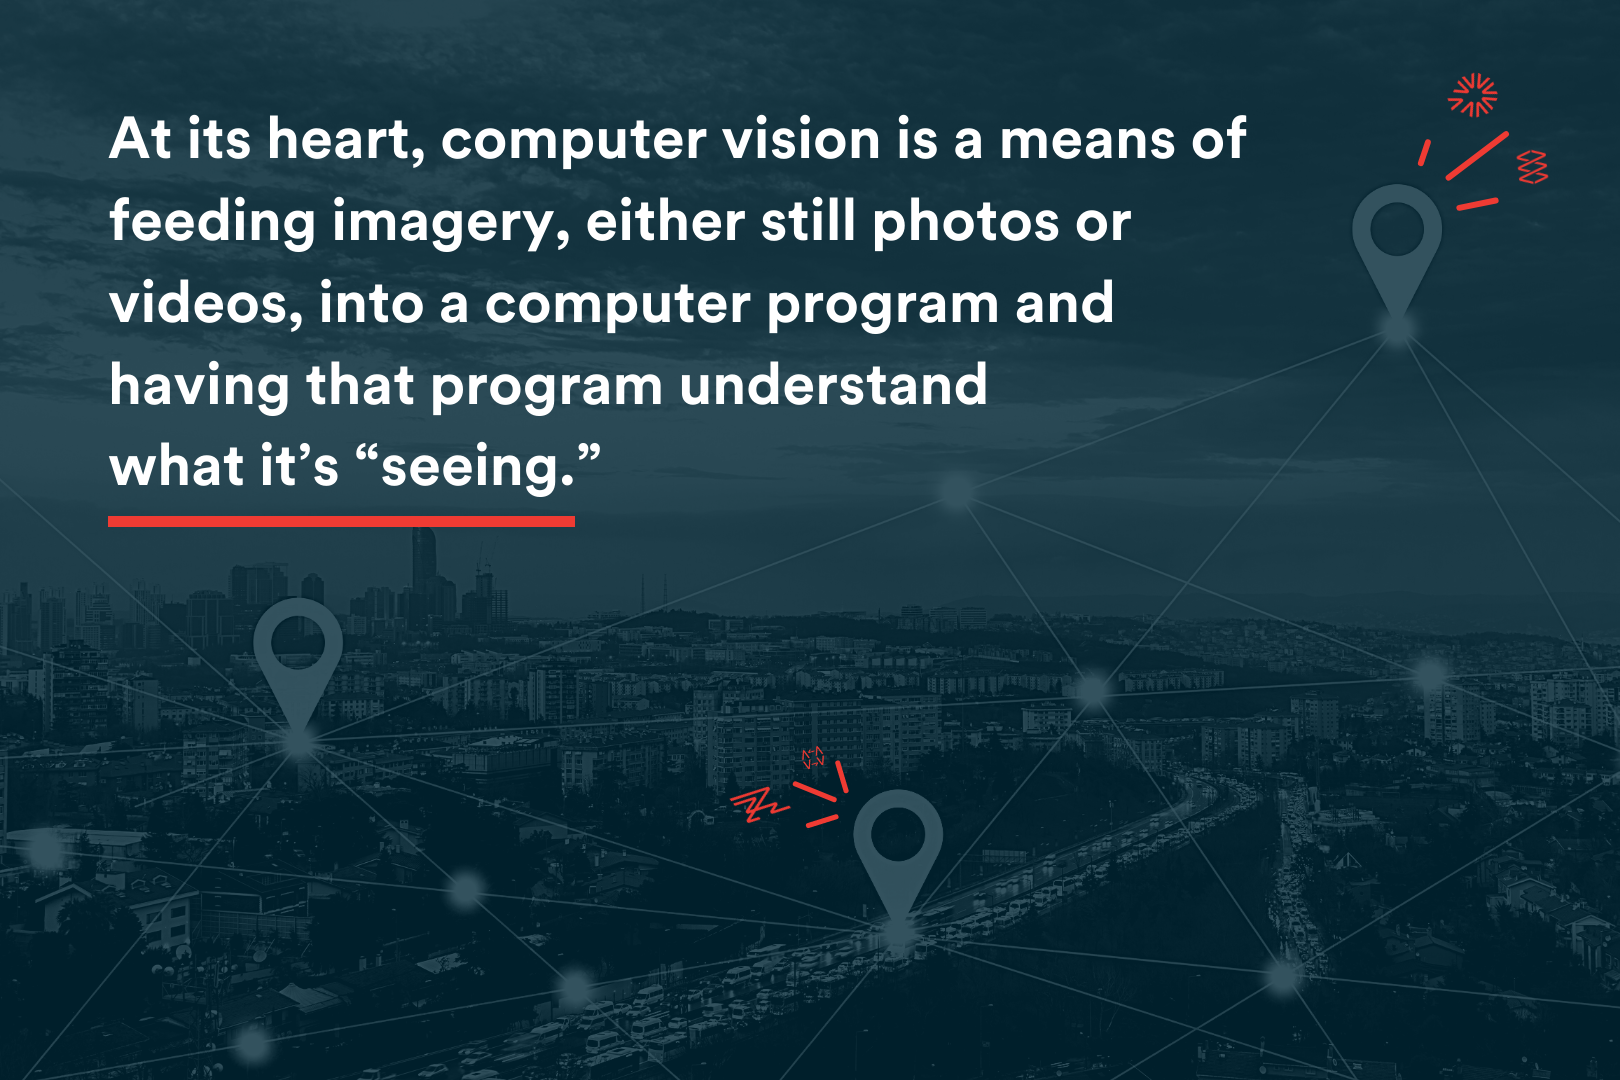 Blog Image - At its heart, computer vision is a means of feeding imagery, either still photos or  videos, into a computer program and  having that program understand  what it’s “seeing.”